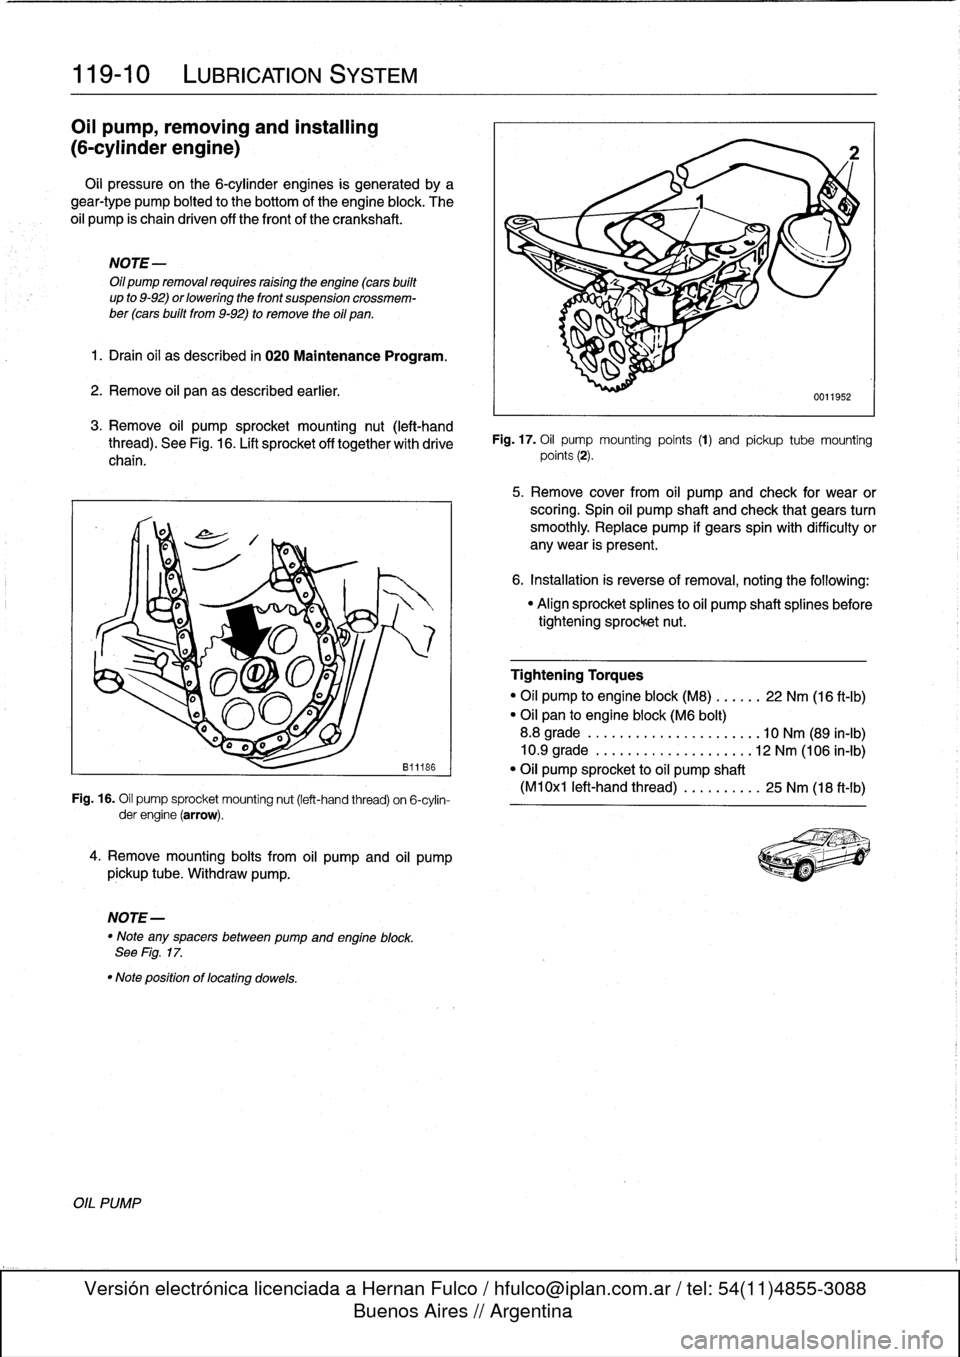 BMW 325i 1992 E36 Owners Guide 
119-
1
0

	

LUBRICATION
SYSTEM

Oil
pump,
removing
and
installing

(6-cylinder
engine)

Oil
pressure
on
the
6-cylinder
engines
is
generated
by
a
gear-type
pump
bolted
to
the
bottom
of
the
engine
blo